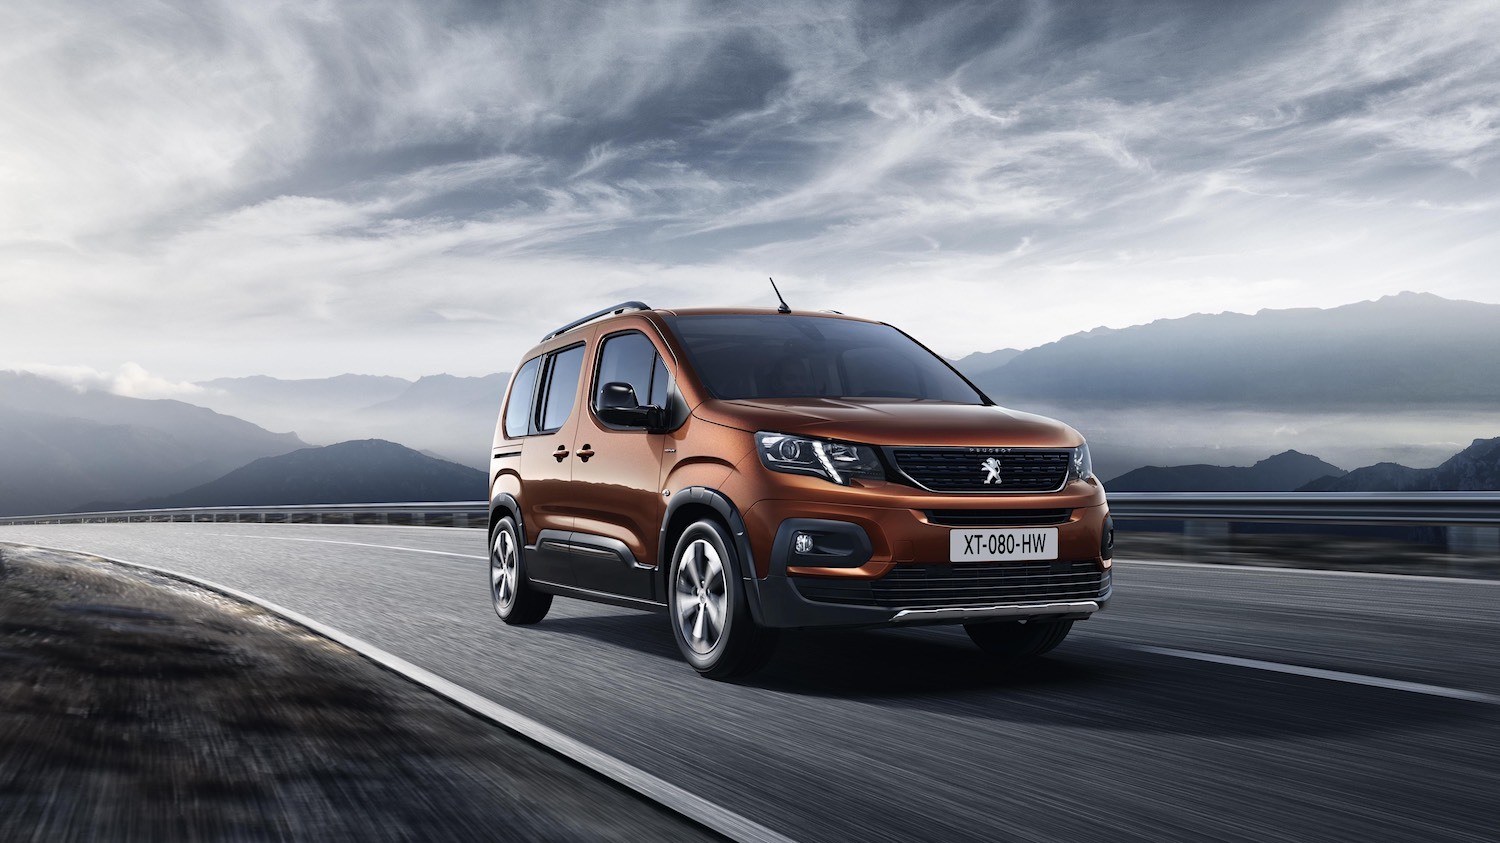 Tim Barnes-Clay reviews the Peugeot Rifter from the European Launch 10